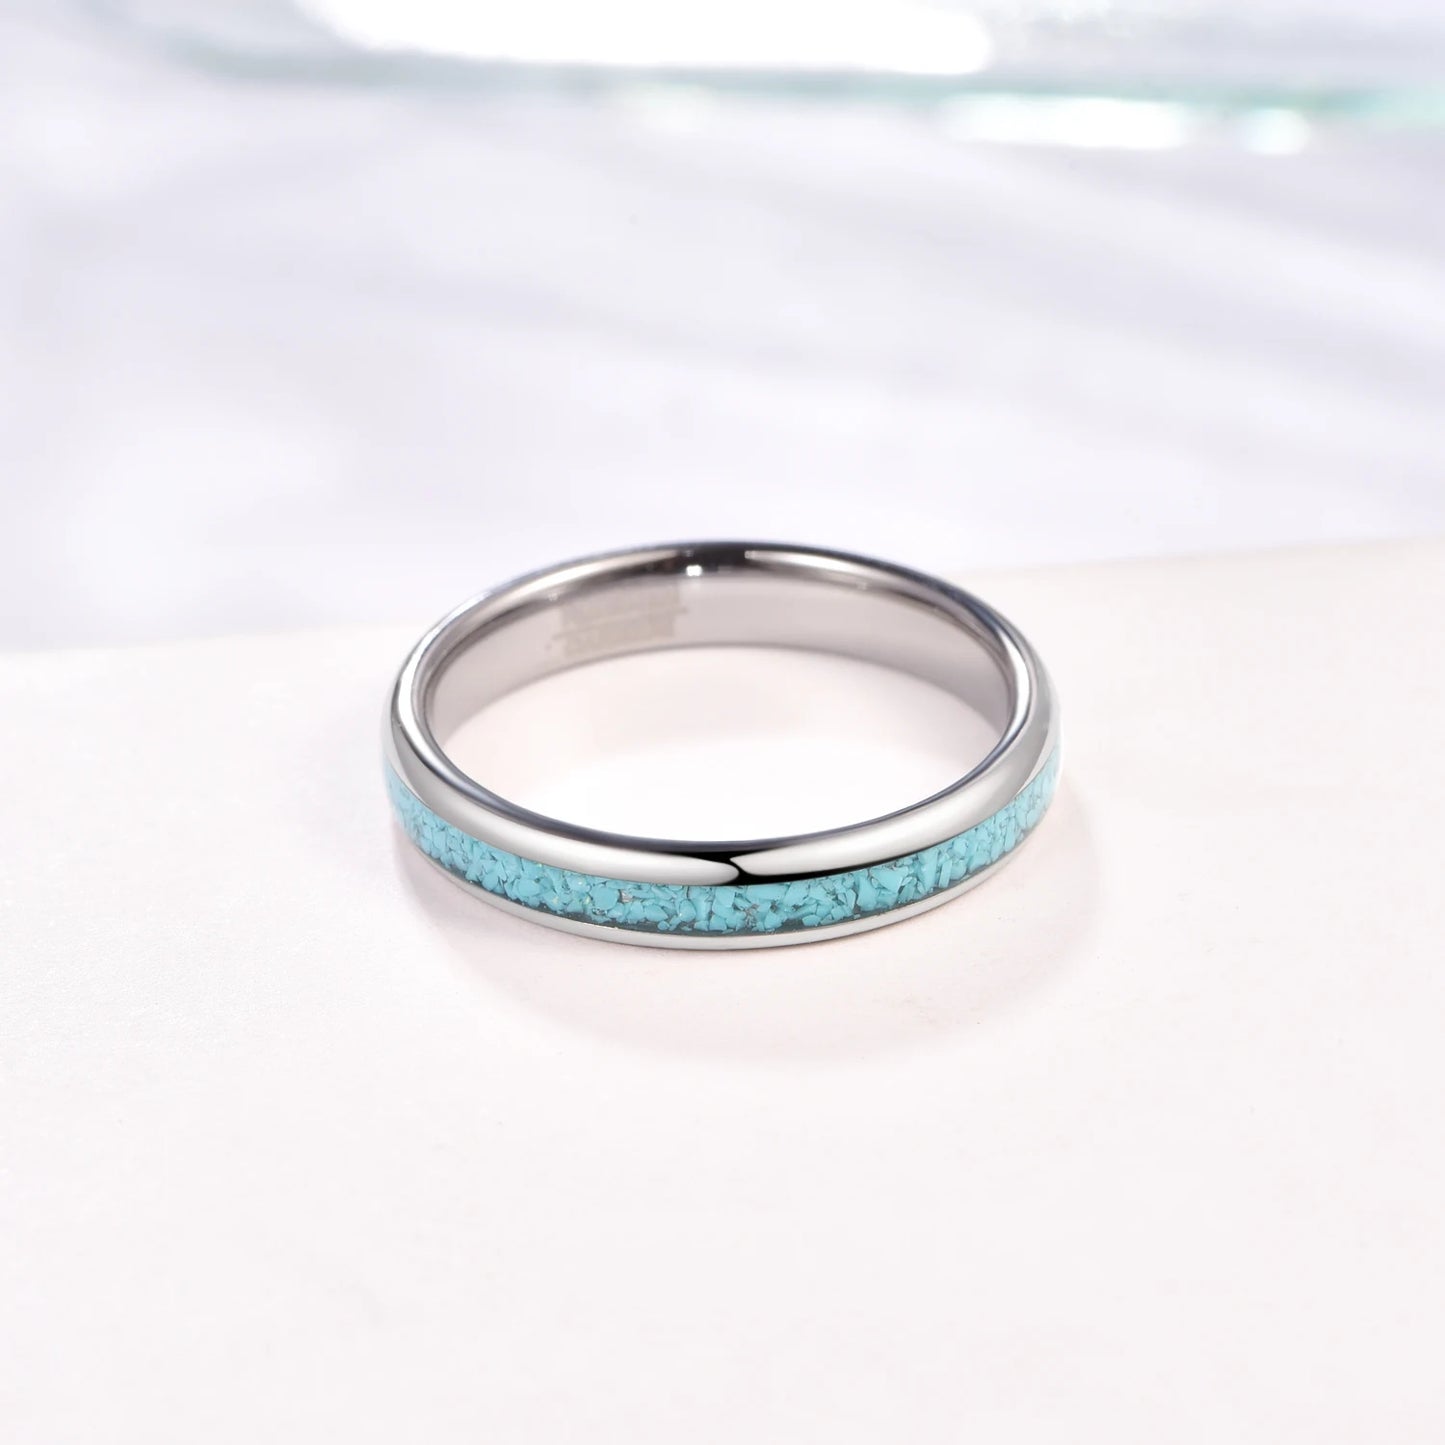 4mm Crushed Blue Turquoise Silver Tungsten Unisex Ring